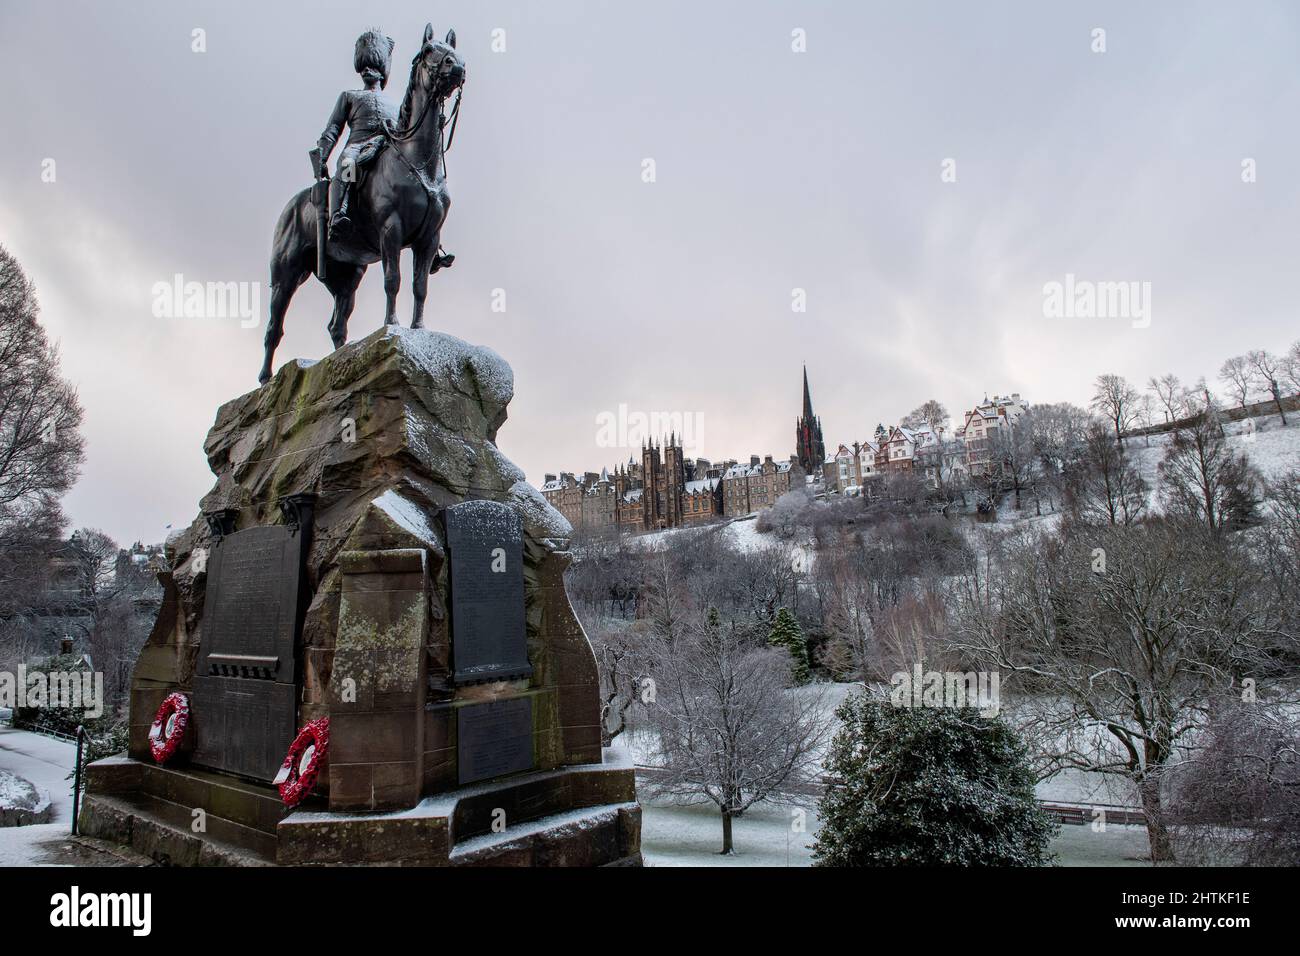 The Royal Scots Greys Monument and Princes Street Gardens covered in snow, Edinburgh, Scotland Stock Photo